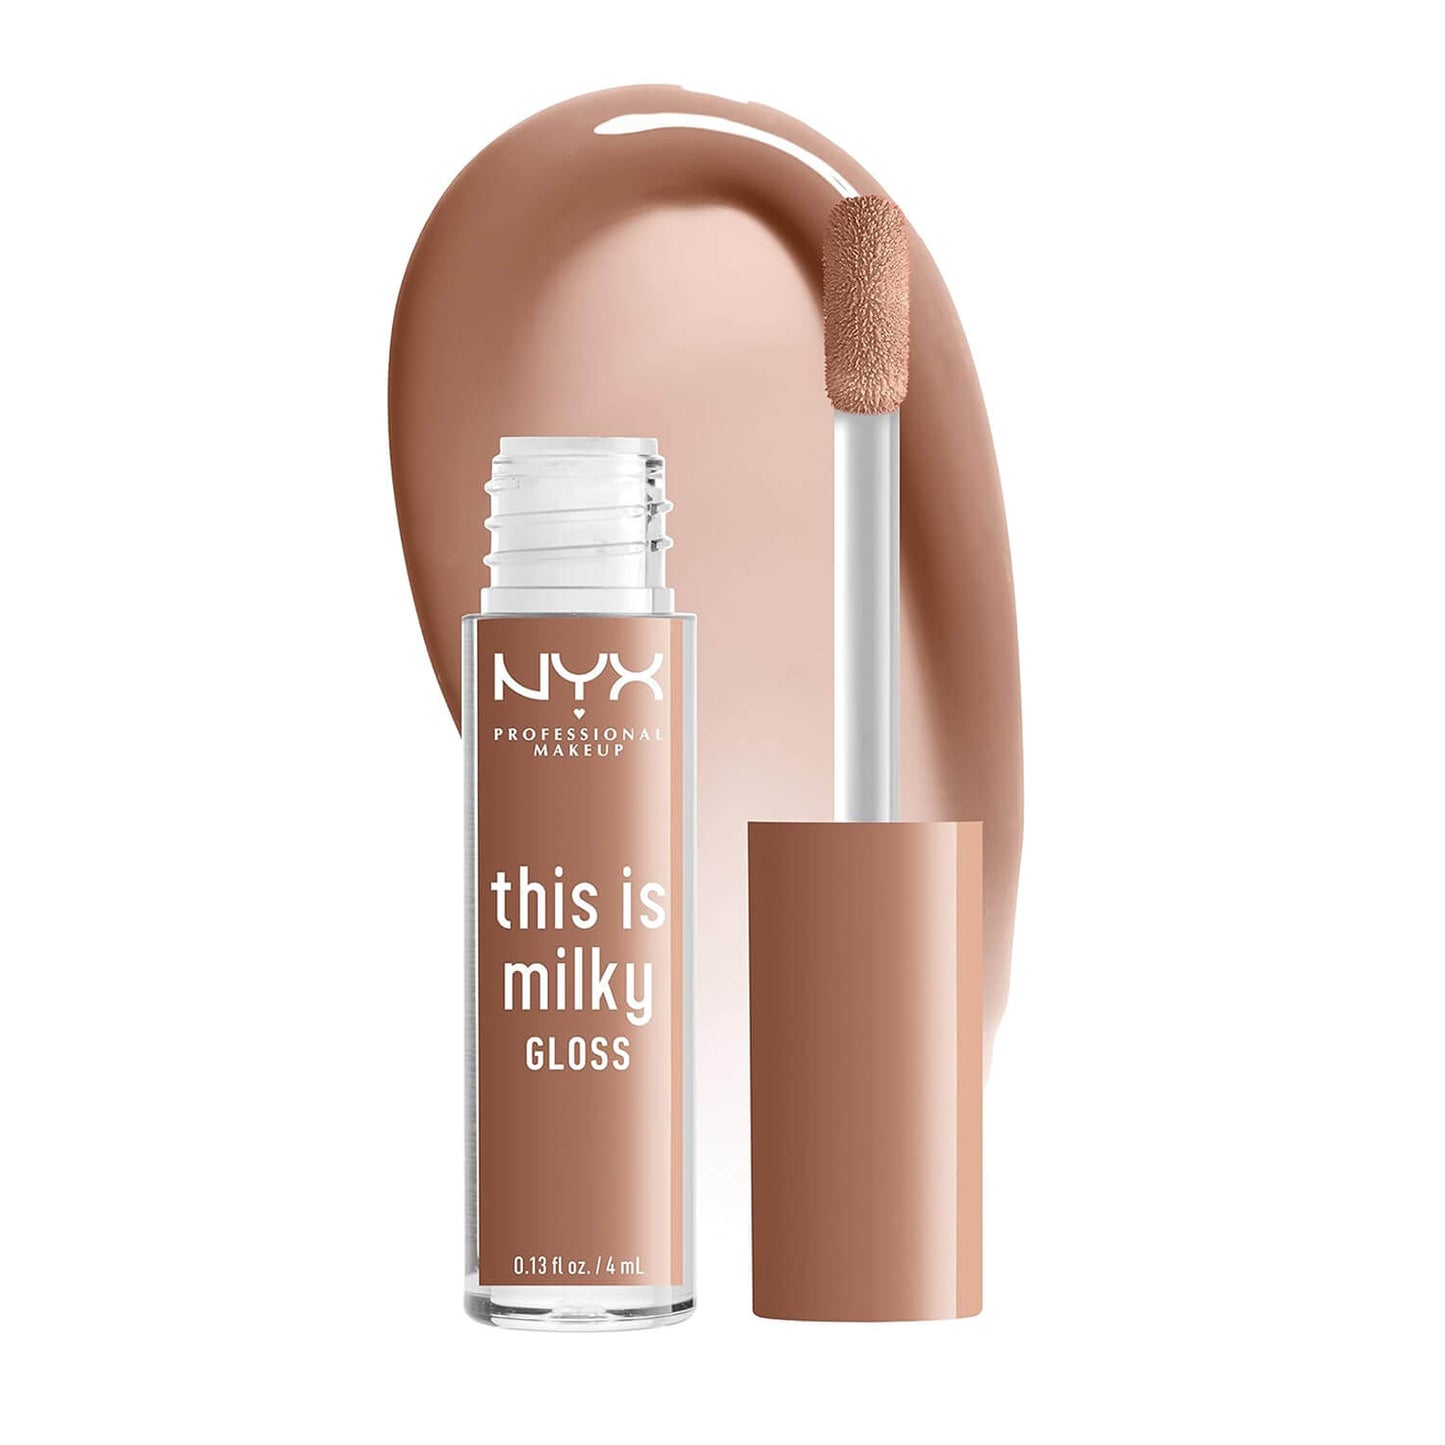 Shop 100% original NYX Lip Gloss in cookies and milk shade available at Heygirl.pk for delivery in Pakistan. 